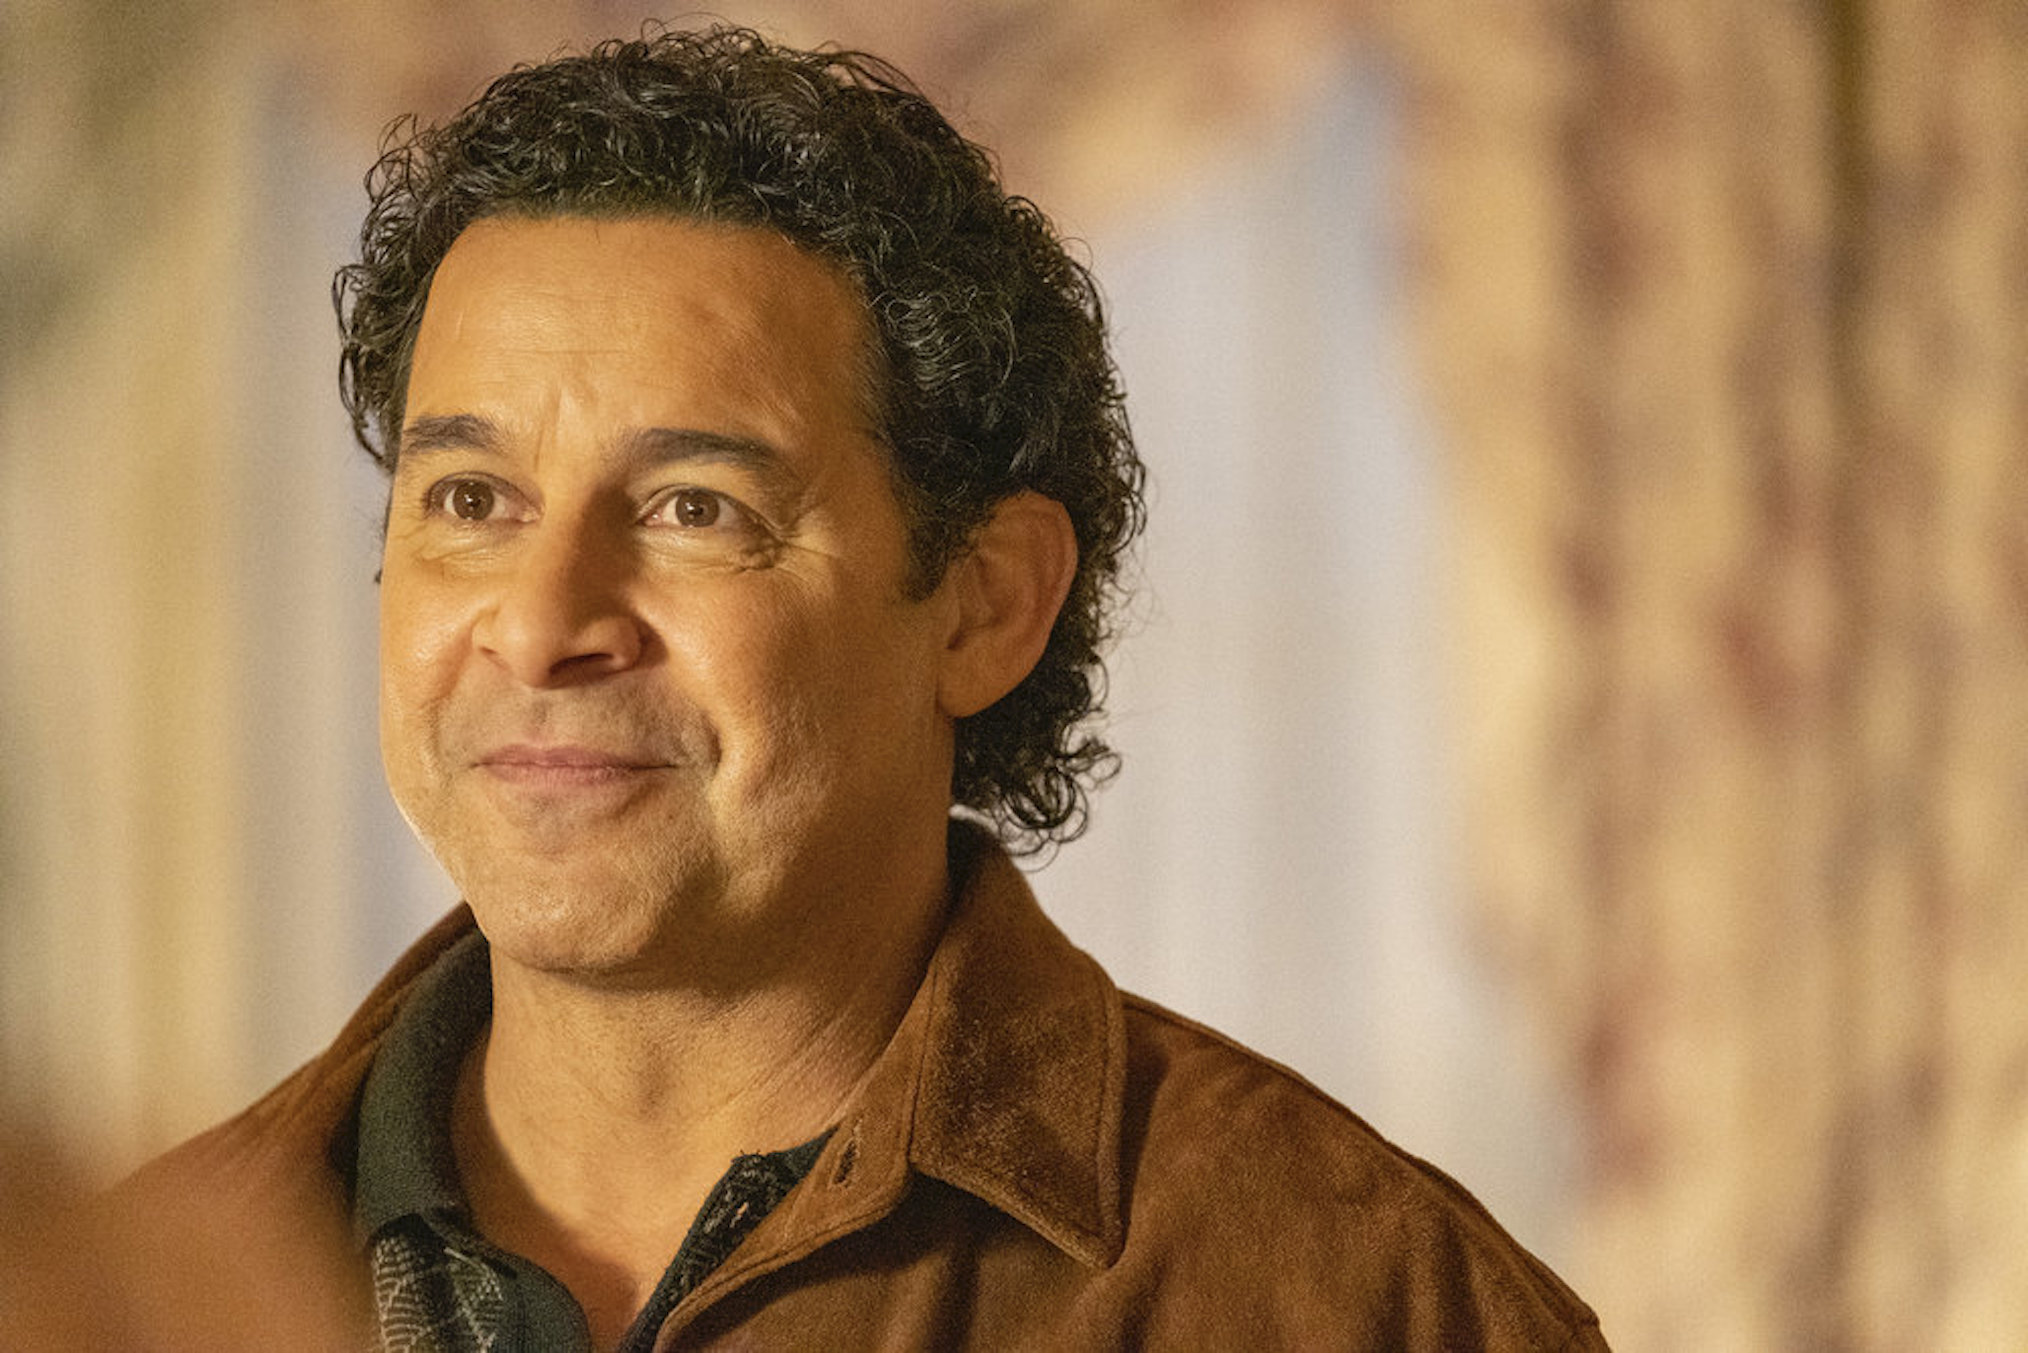 This Is Us Too: 6.15 – “Miguel”